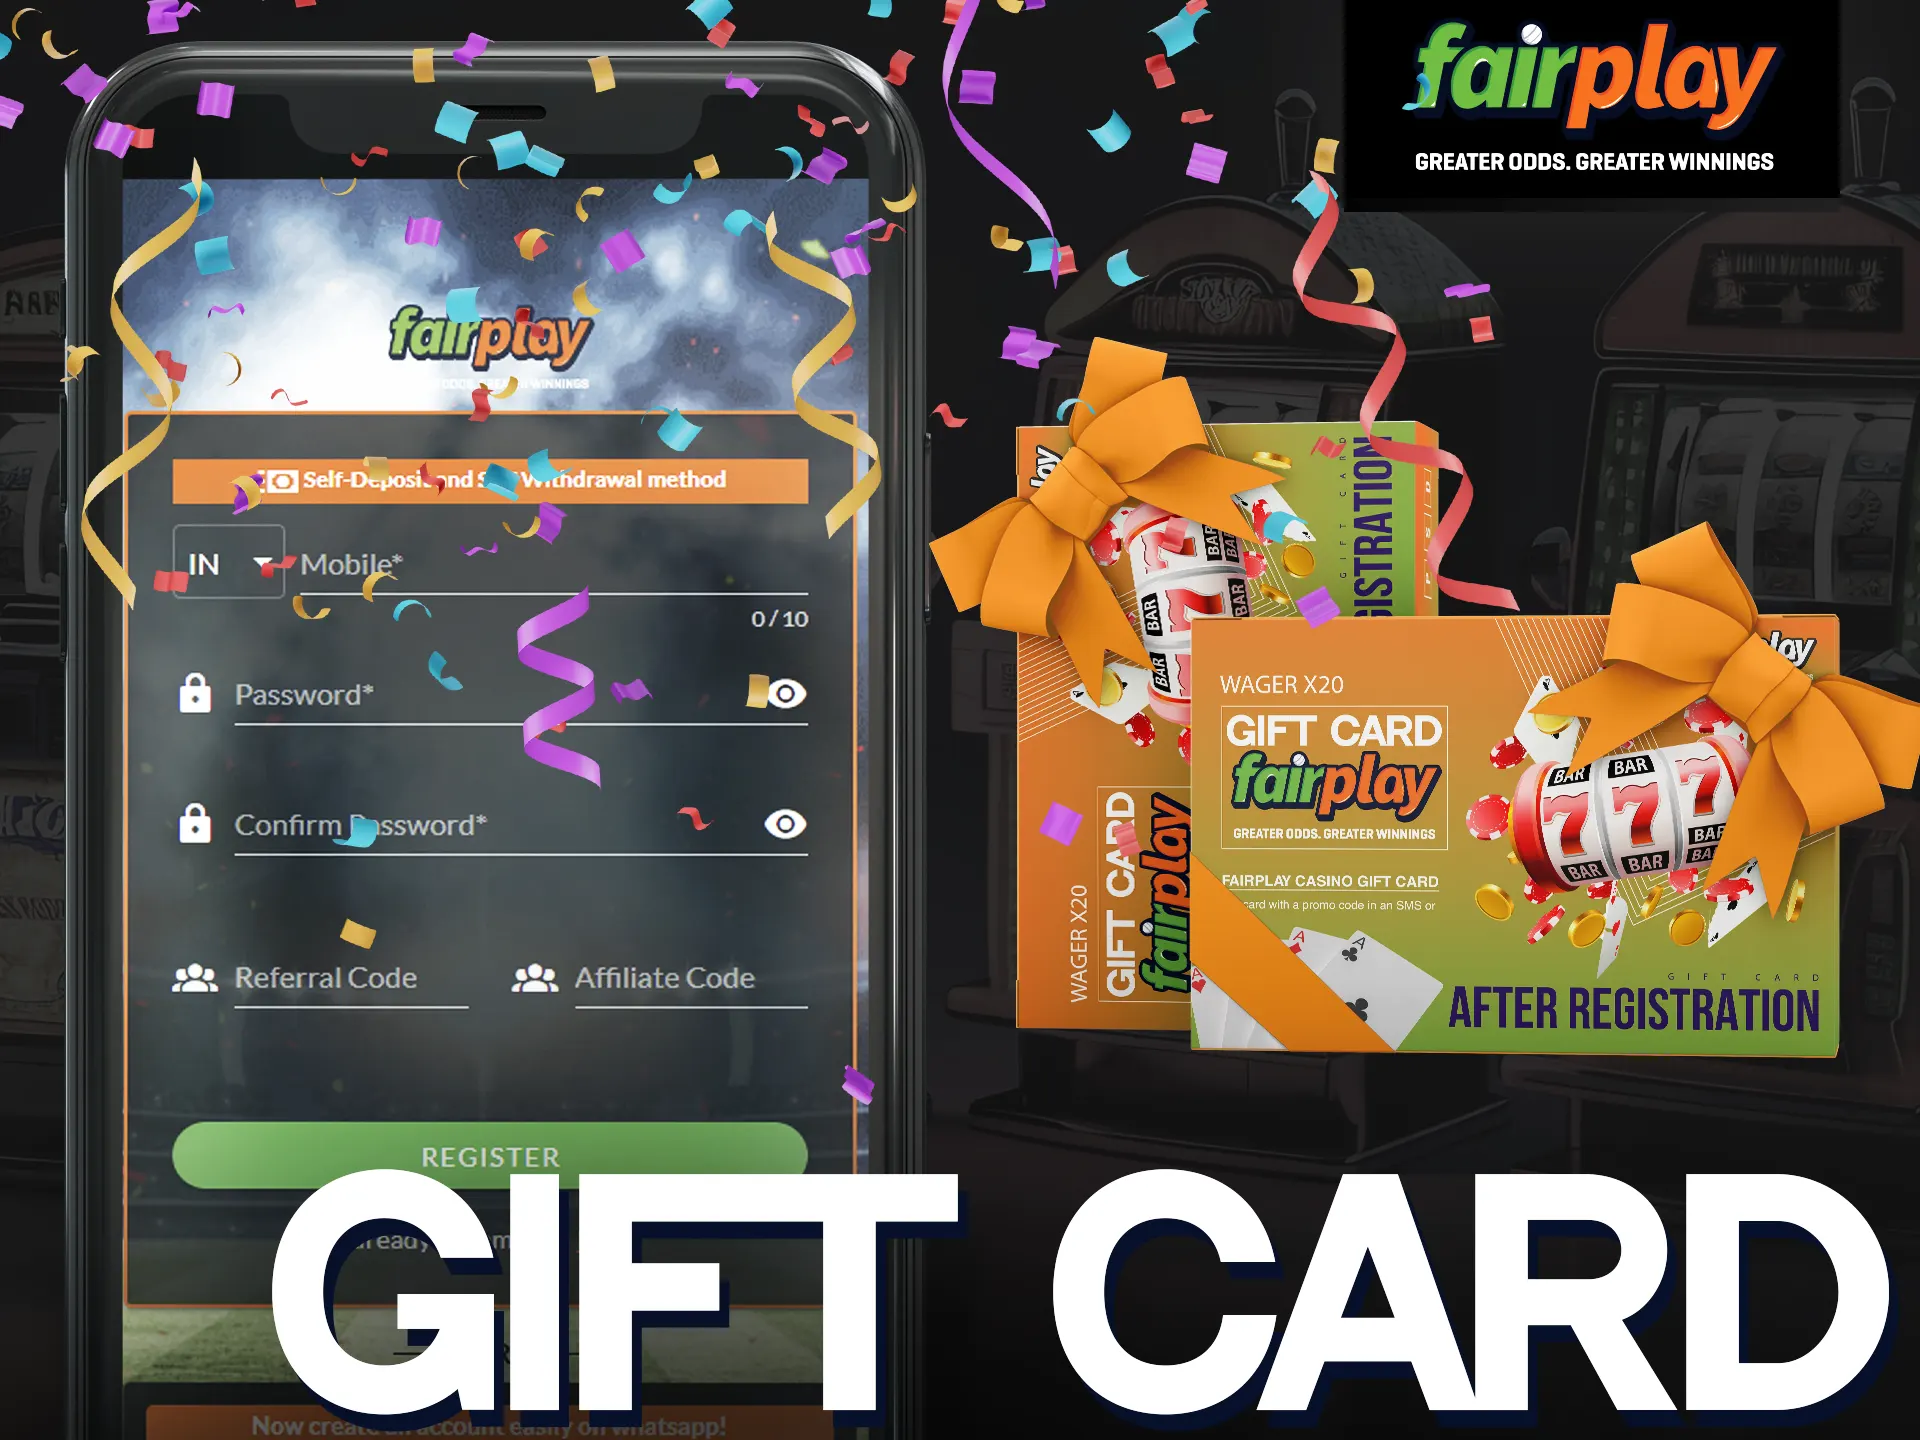 To get a gift card at Fairplay, sign up, receive promo, bonus with x20 wagering.